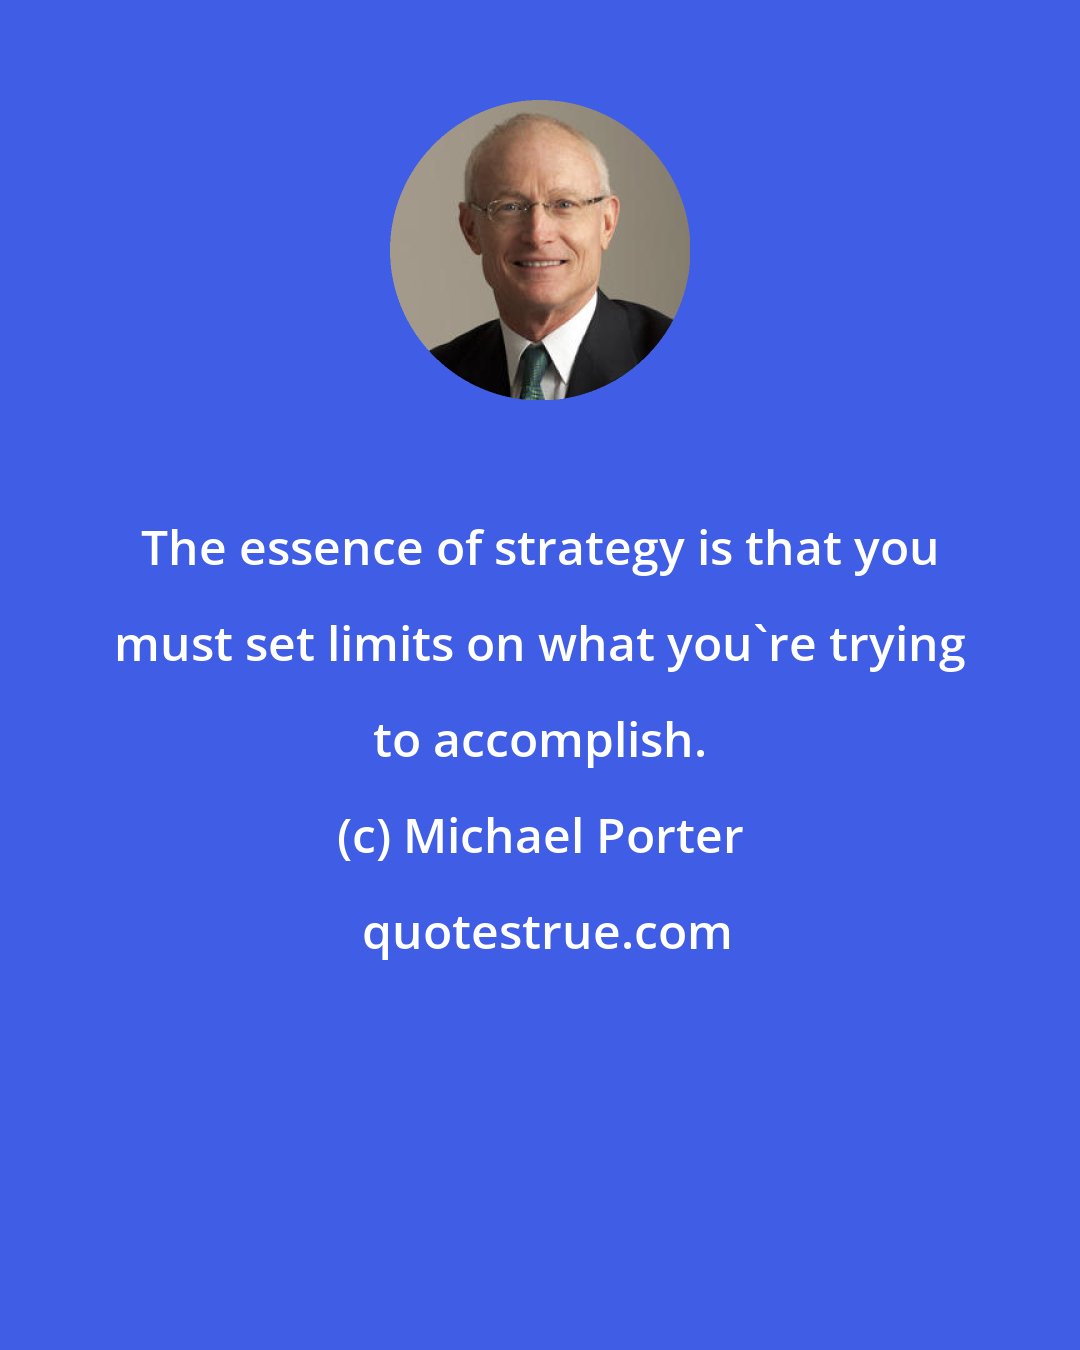 Michael Porter: The essence of strategy is that you must set limits on what you're trying to accomplish.